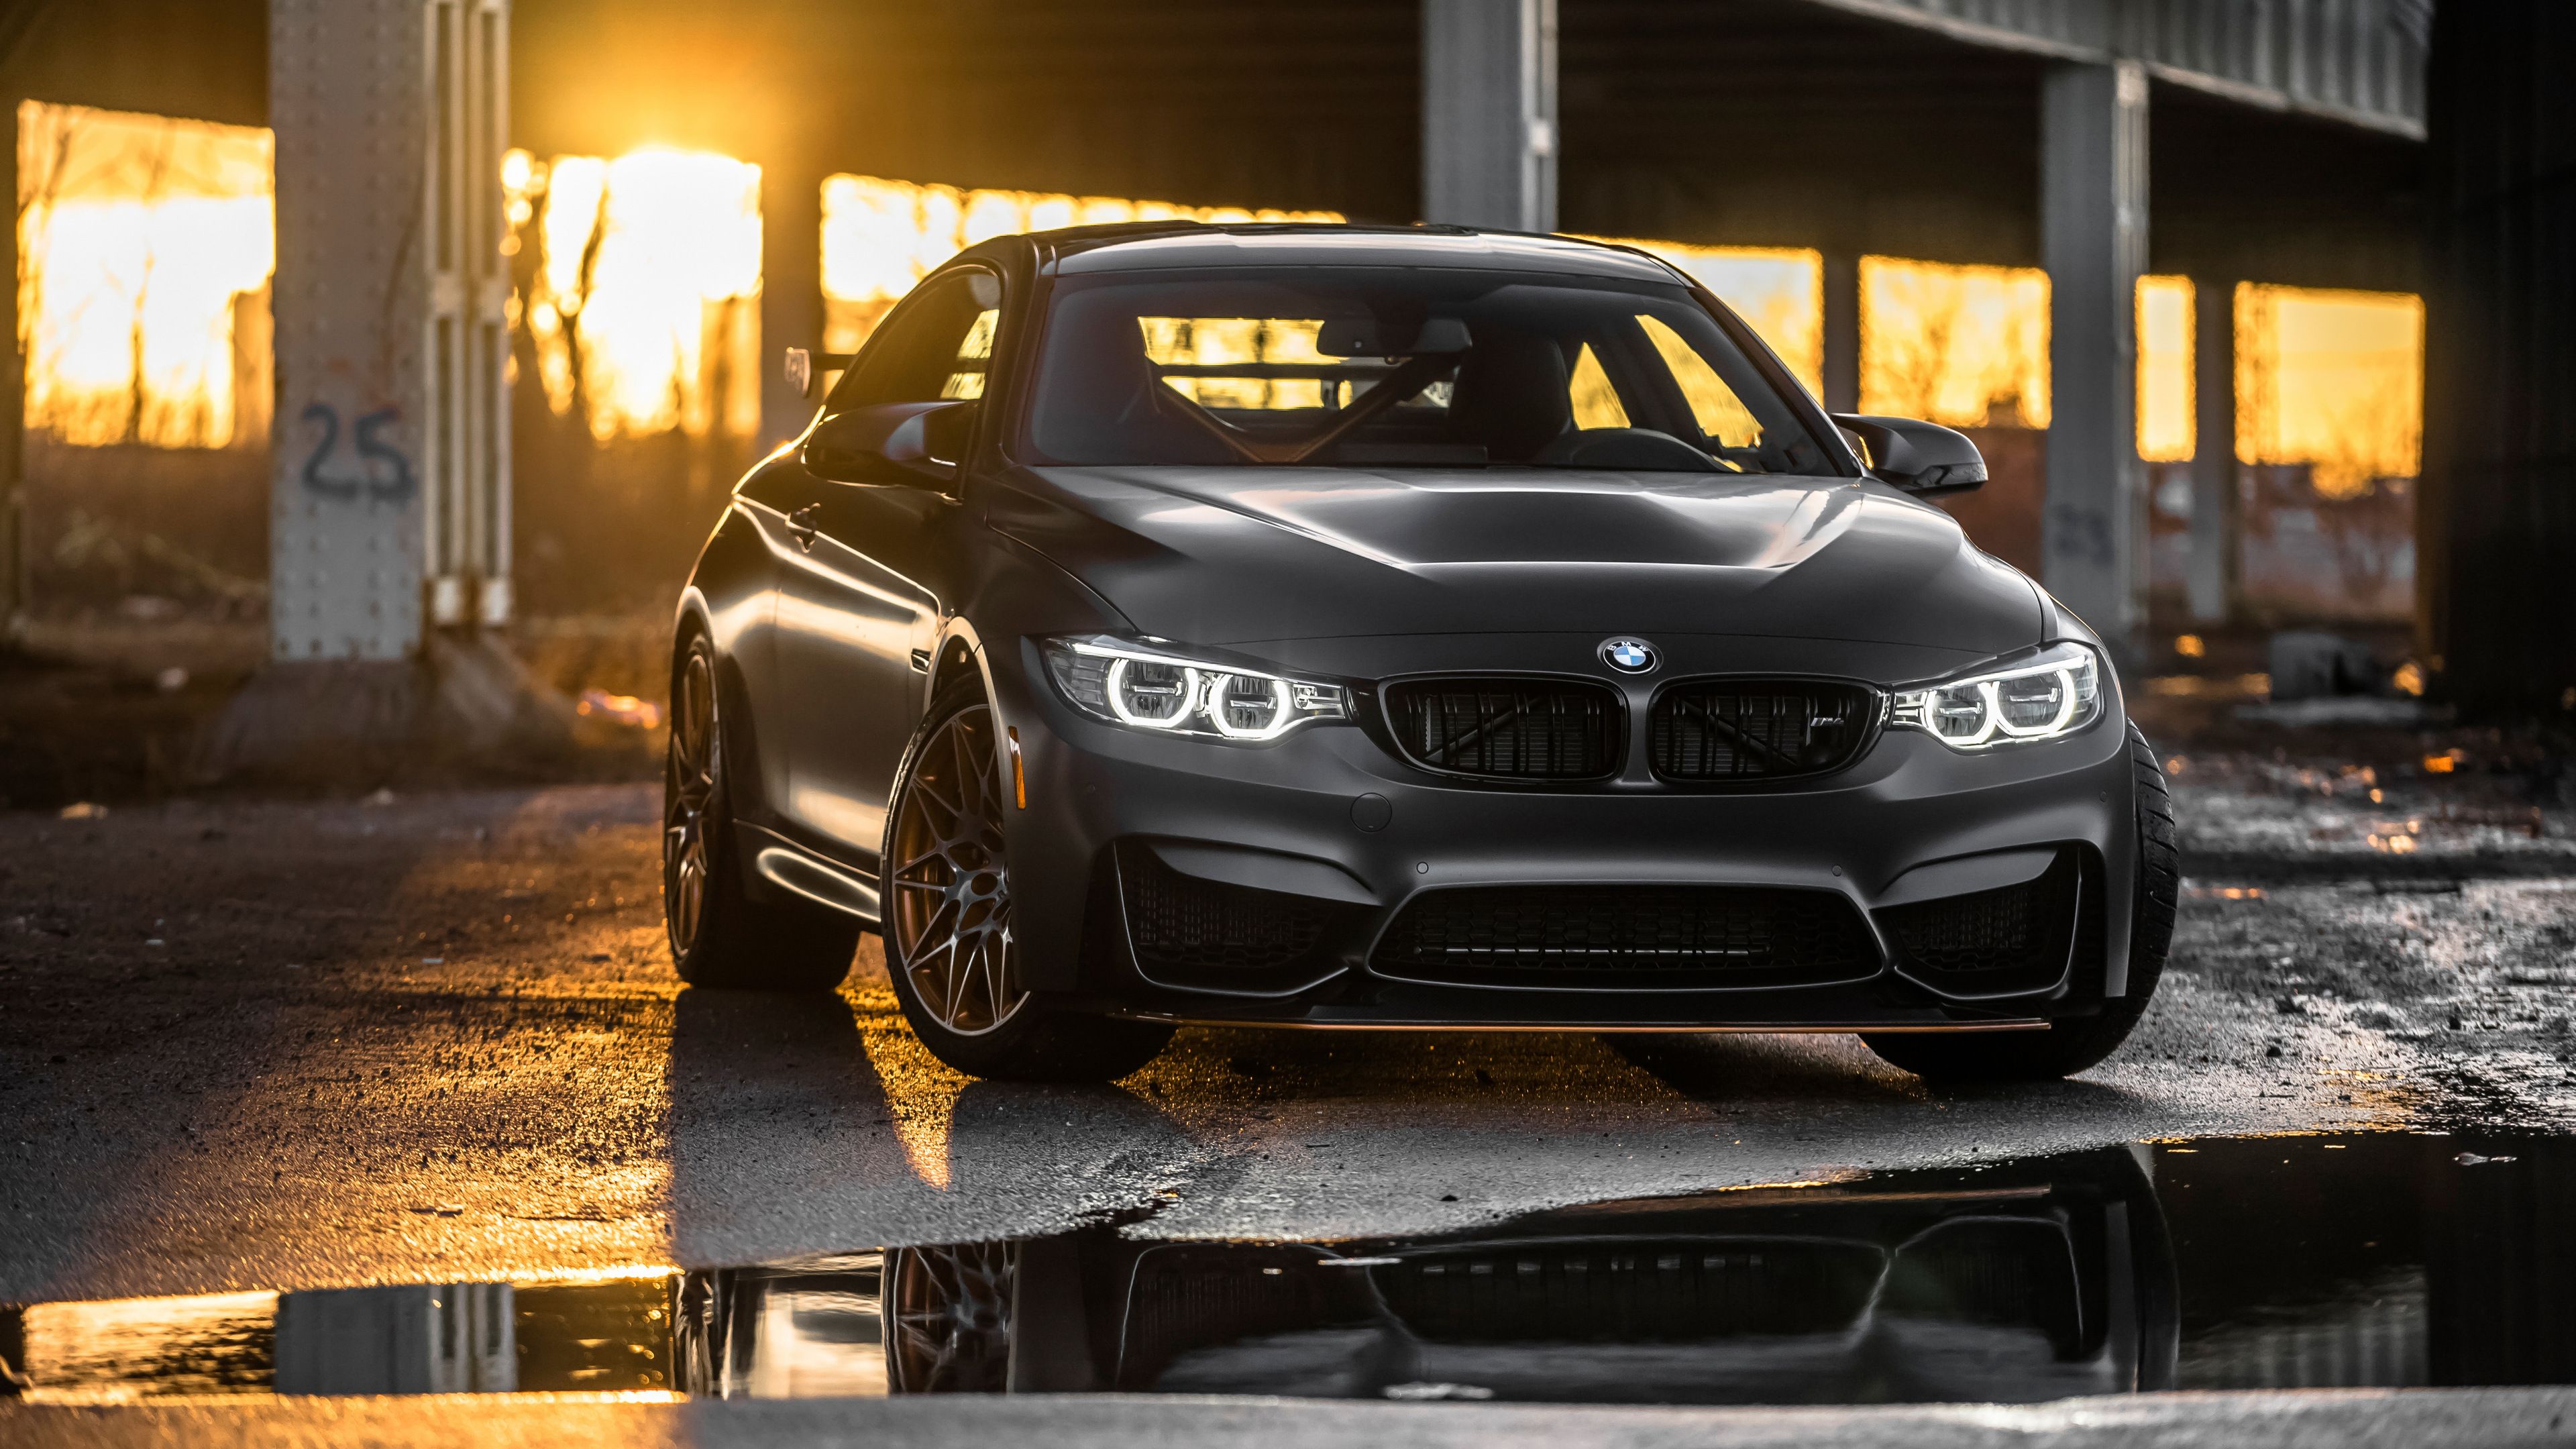 36+ Bass Boosted Song Bmw M6 Wallpaper full HD